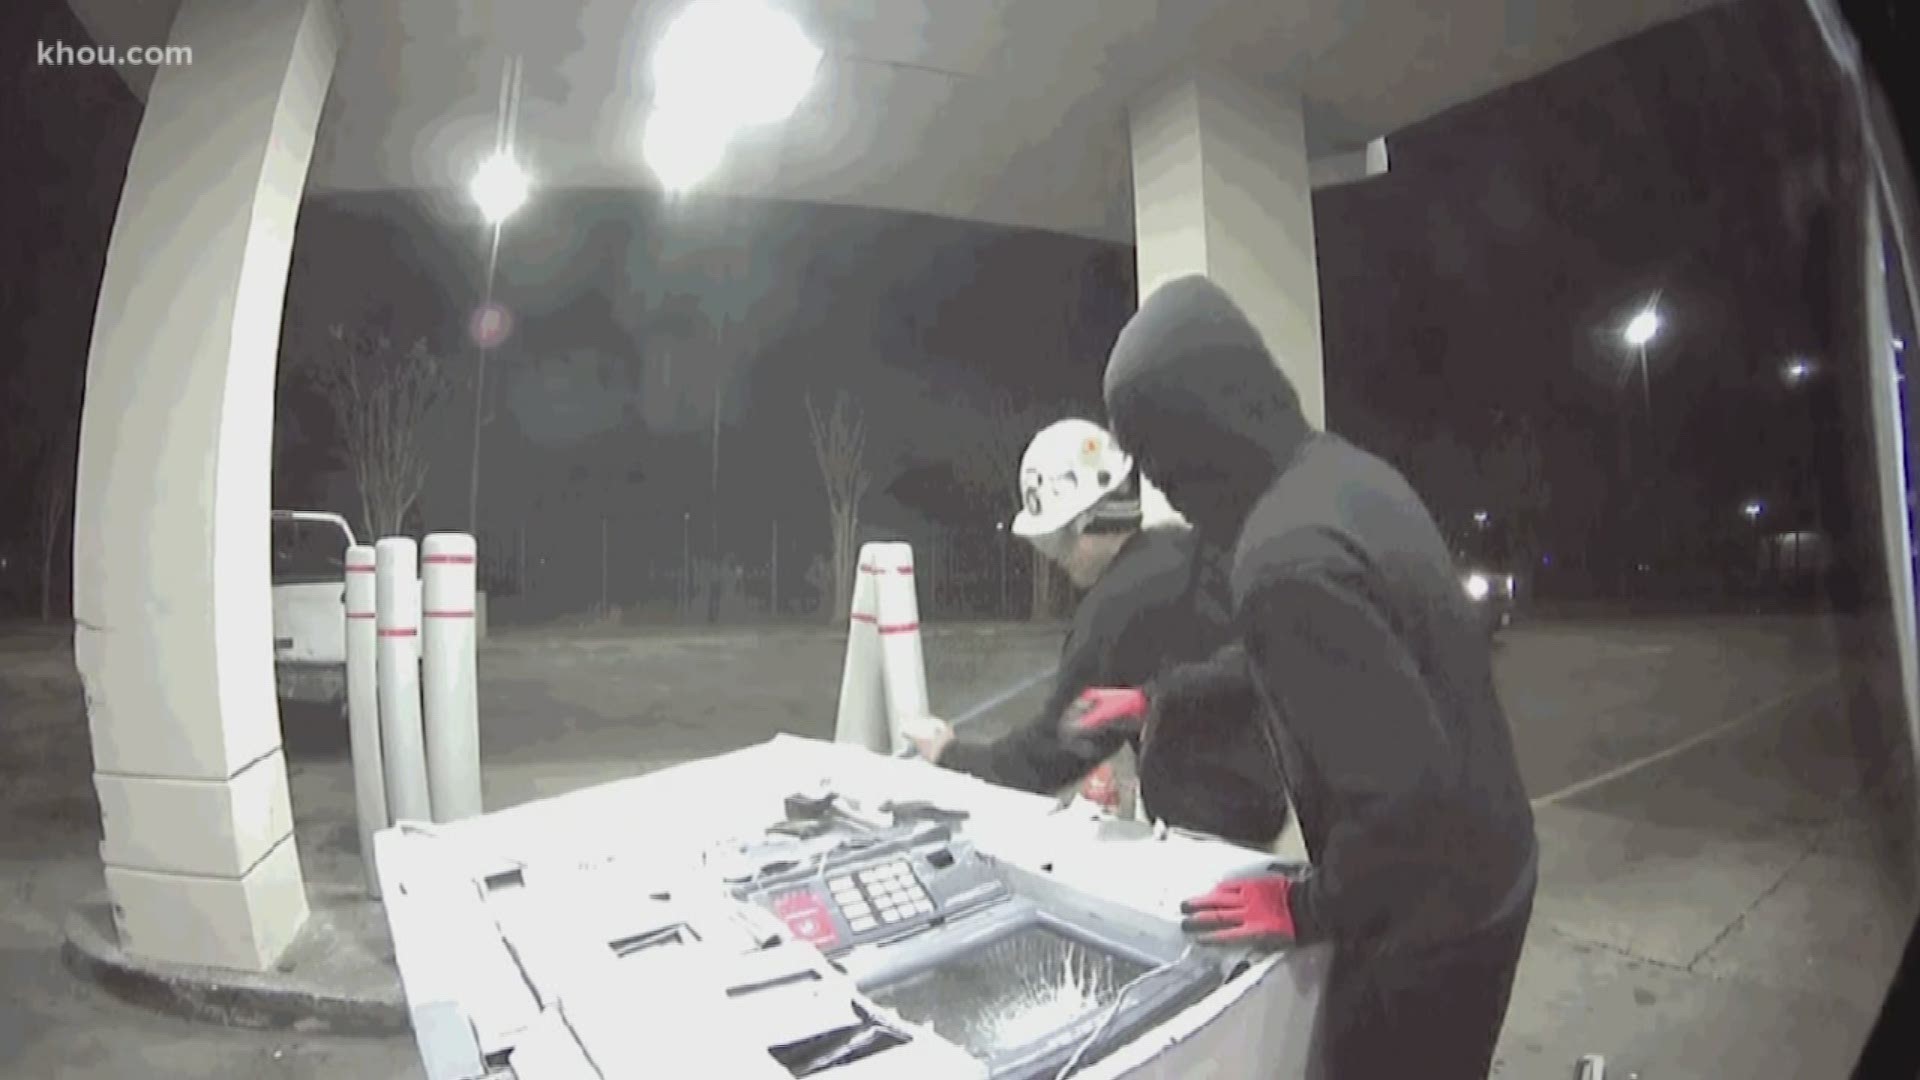 Houston Crime Stoppers hopes someone will recognize the men responsible for a destructive failed ATM heist in southwest Houston.